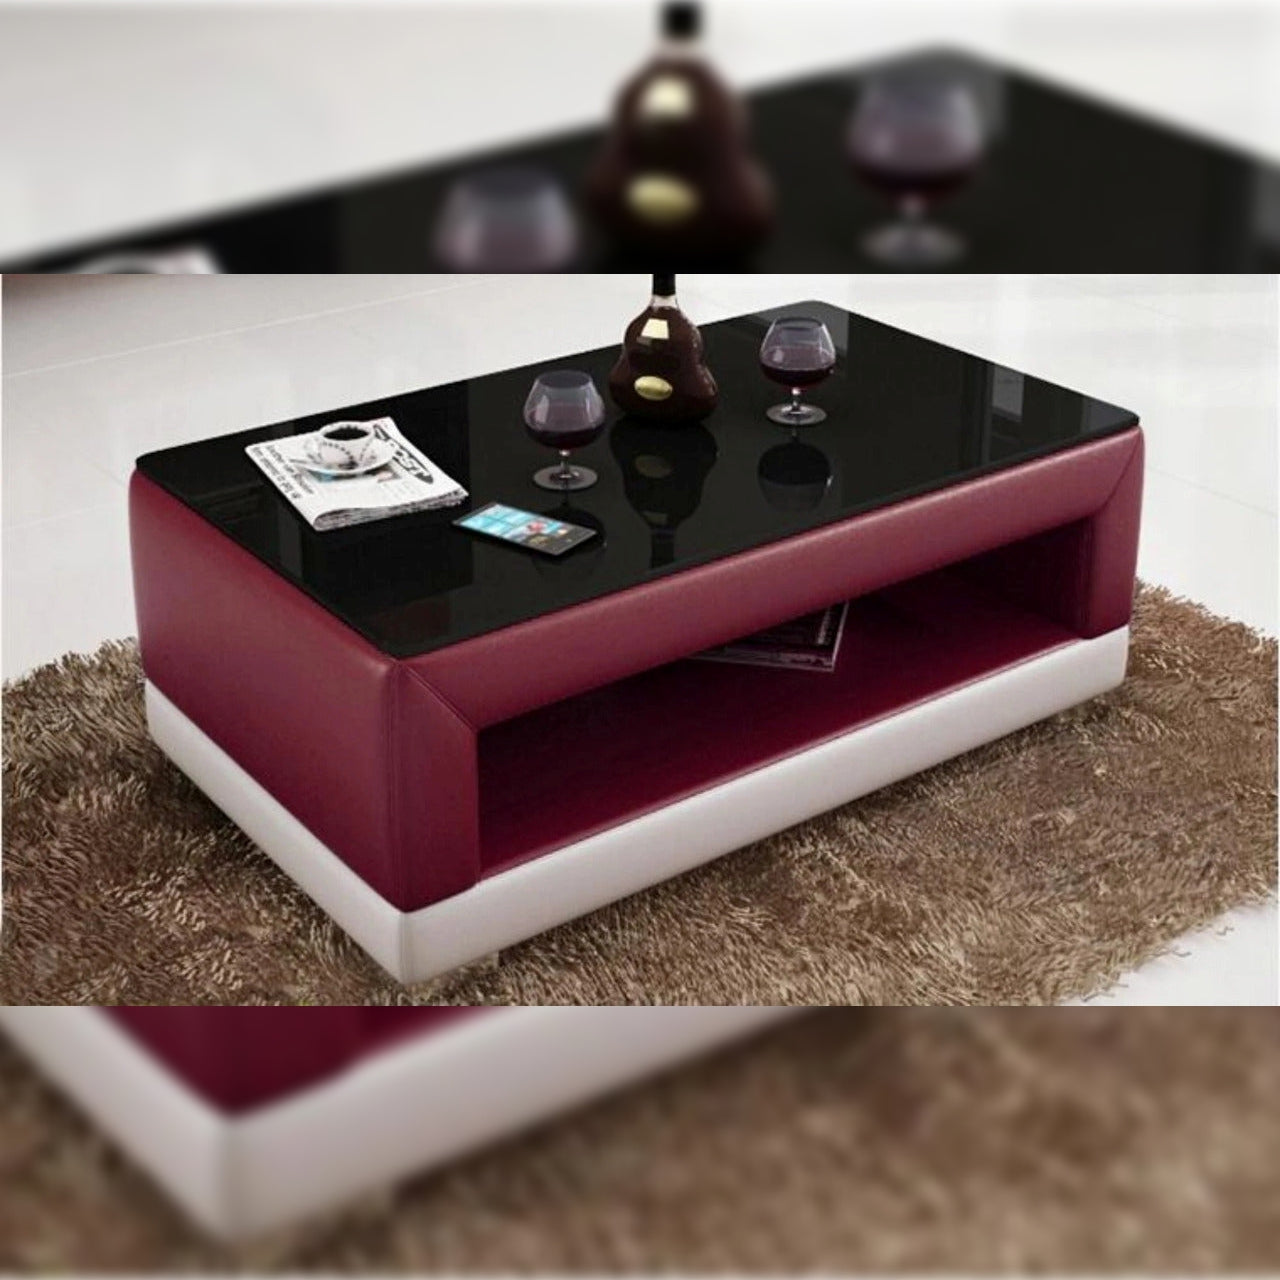 Leatherette Coffee Table Contemporary Maroon and White Leatherette Coffee Table WBlack Glass Table Top